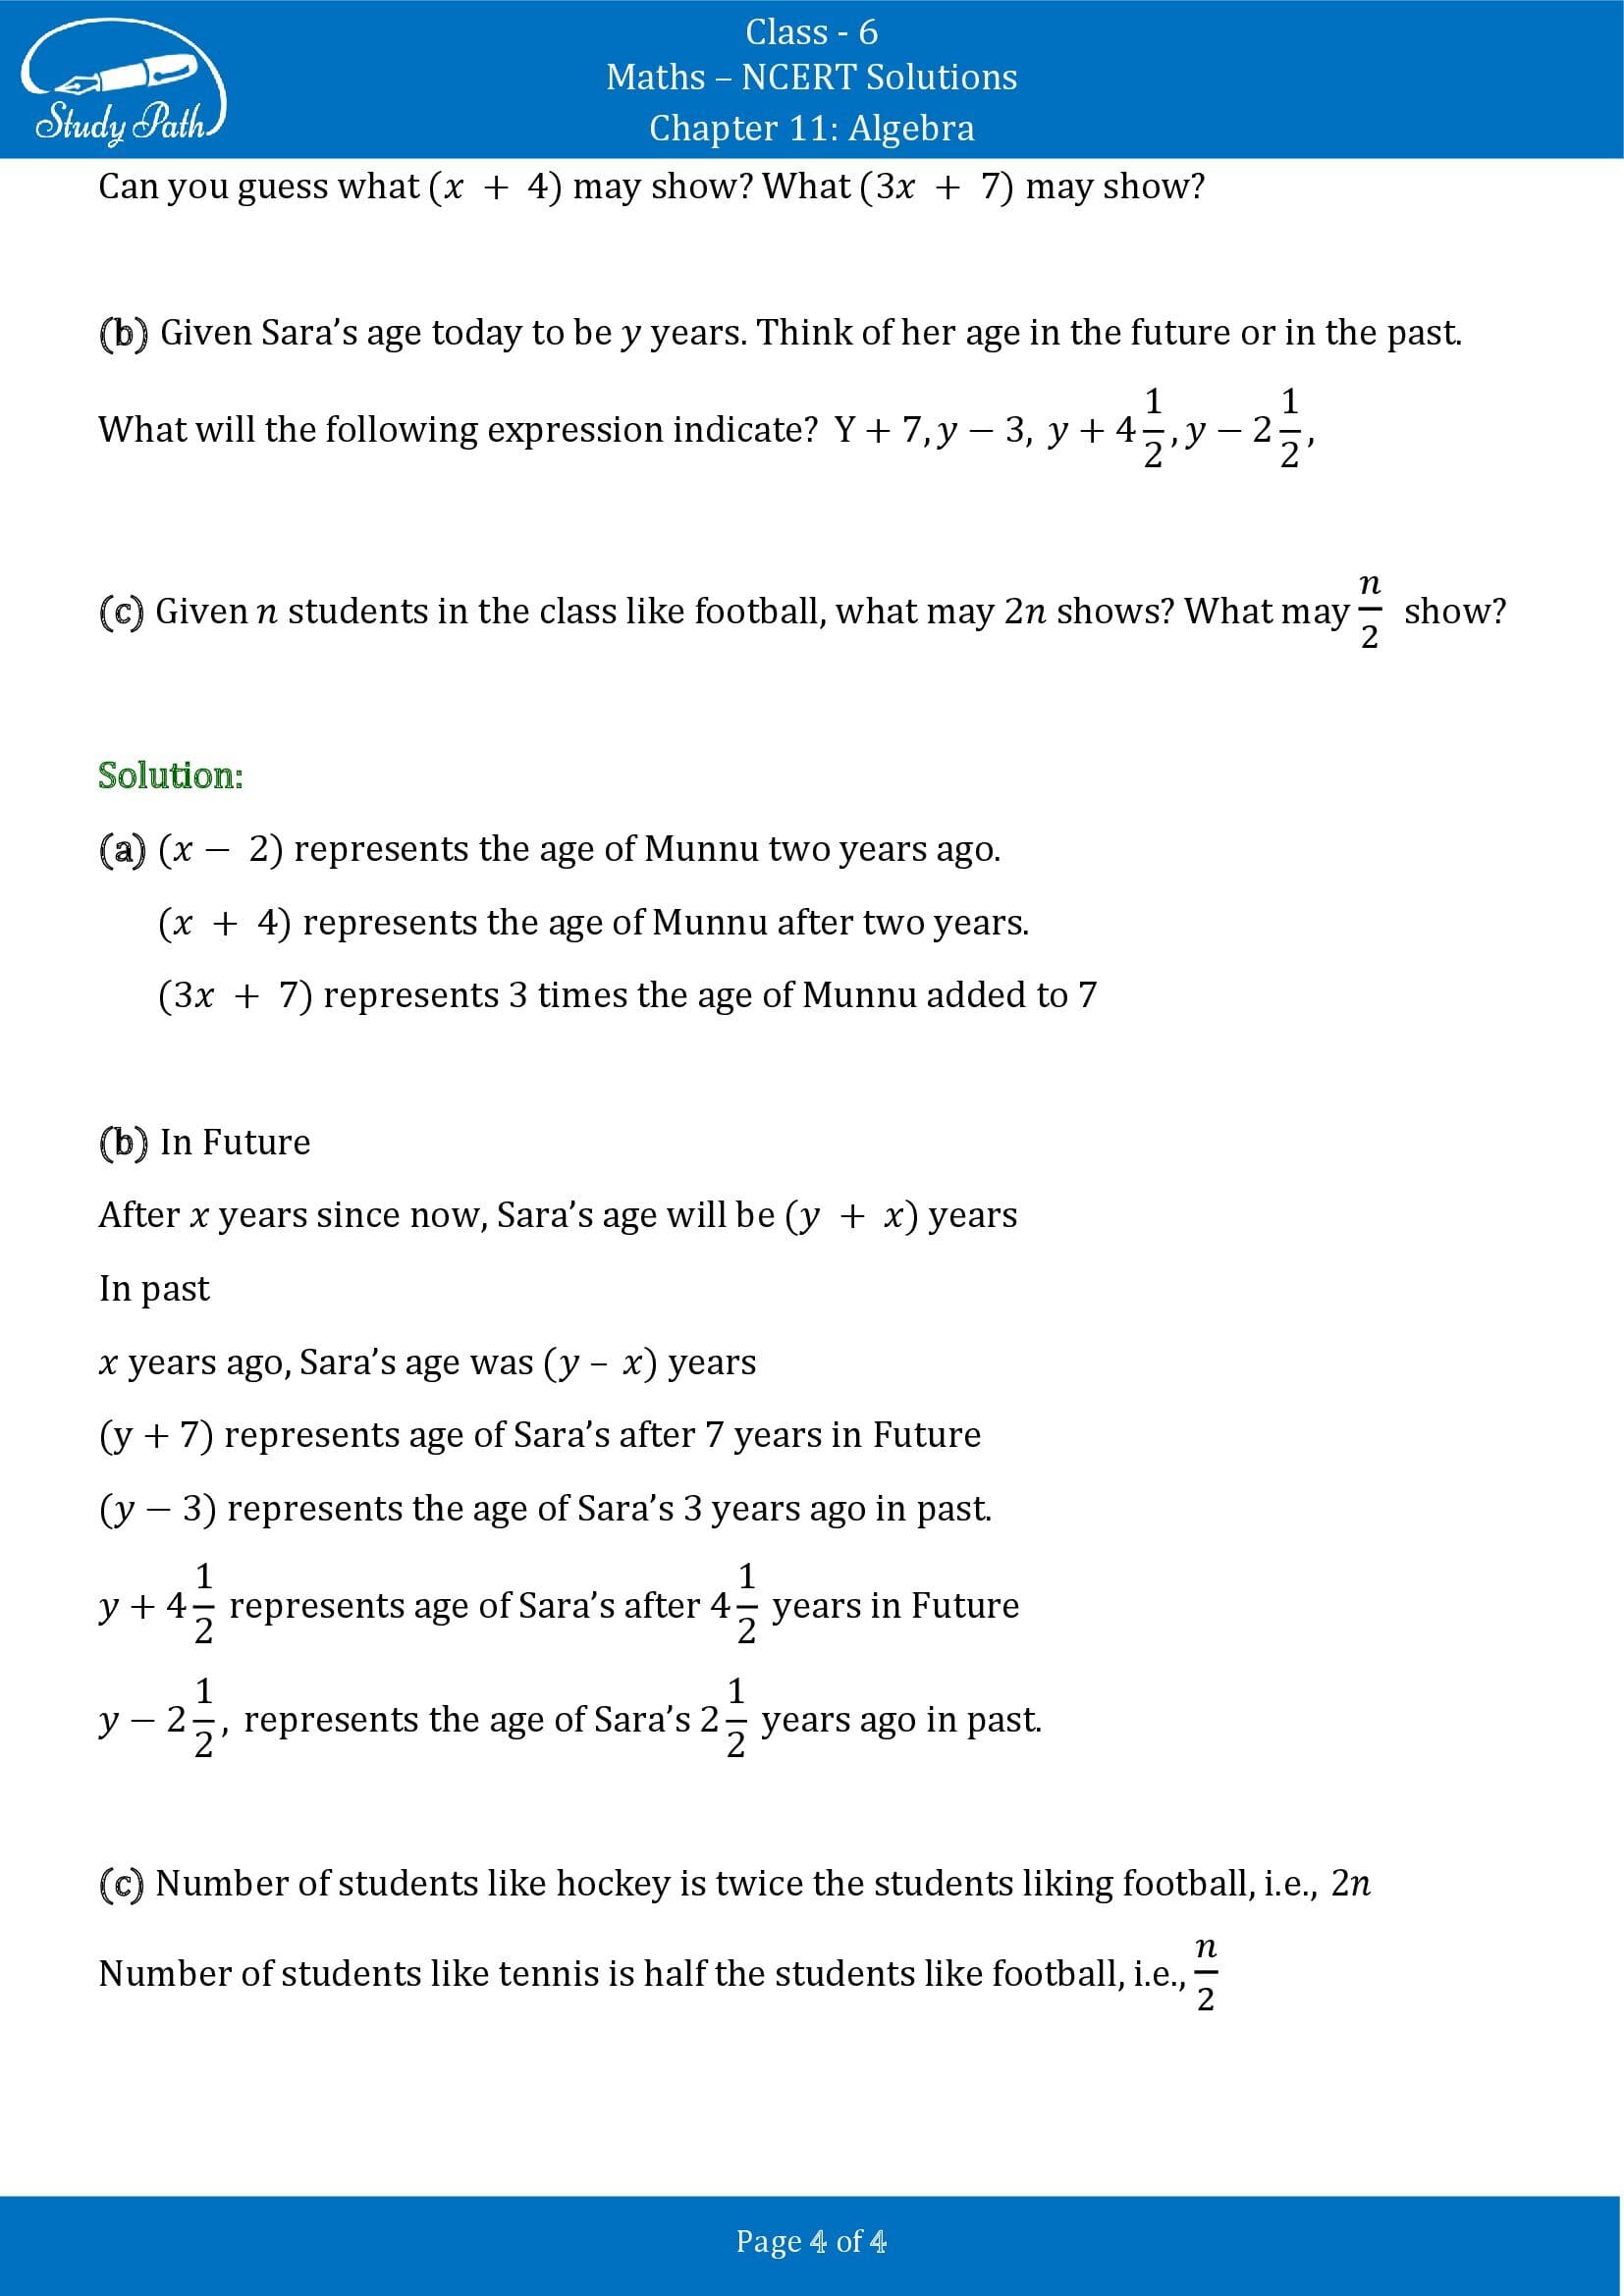 NCERT Solutions for Class 6 Maths Chapter 11 Algebra Exercise 11.4 00004